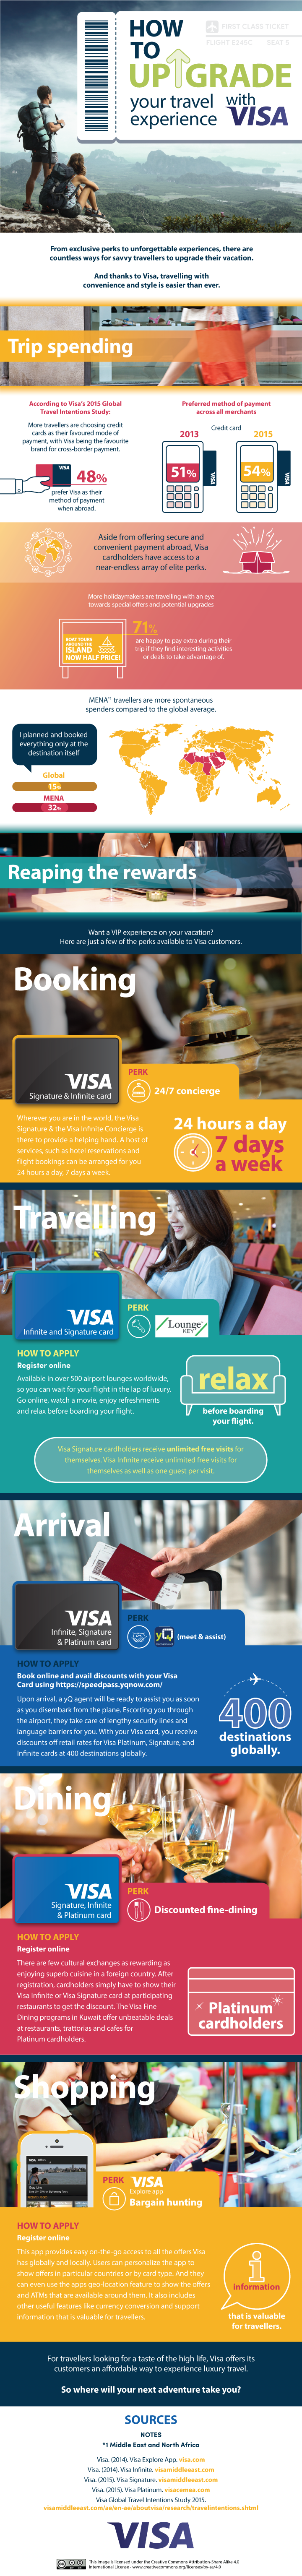 V2-How-to-upgrade-your-travel-exp-with-visa